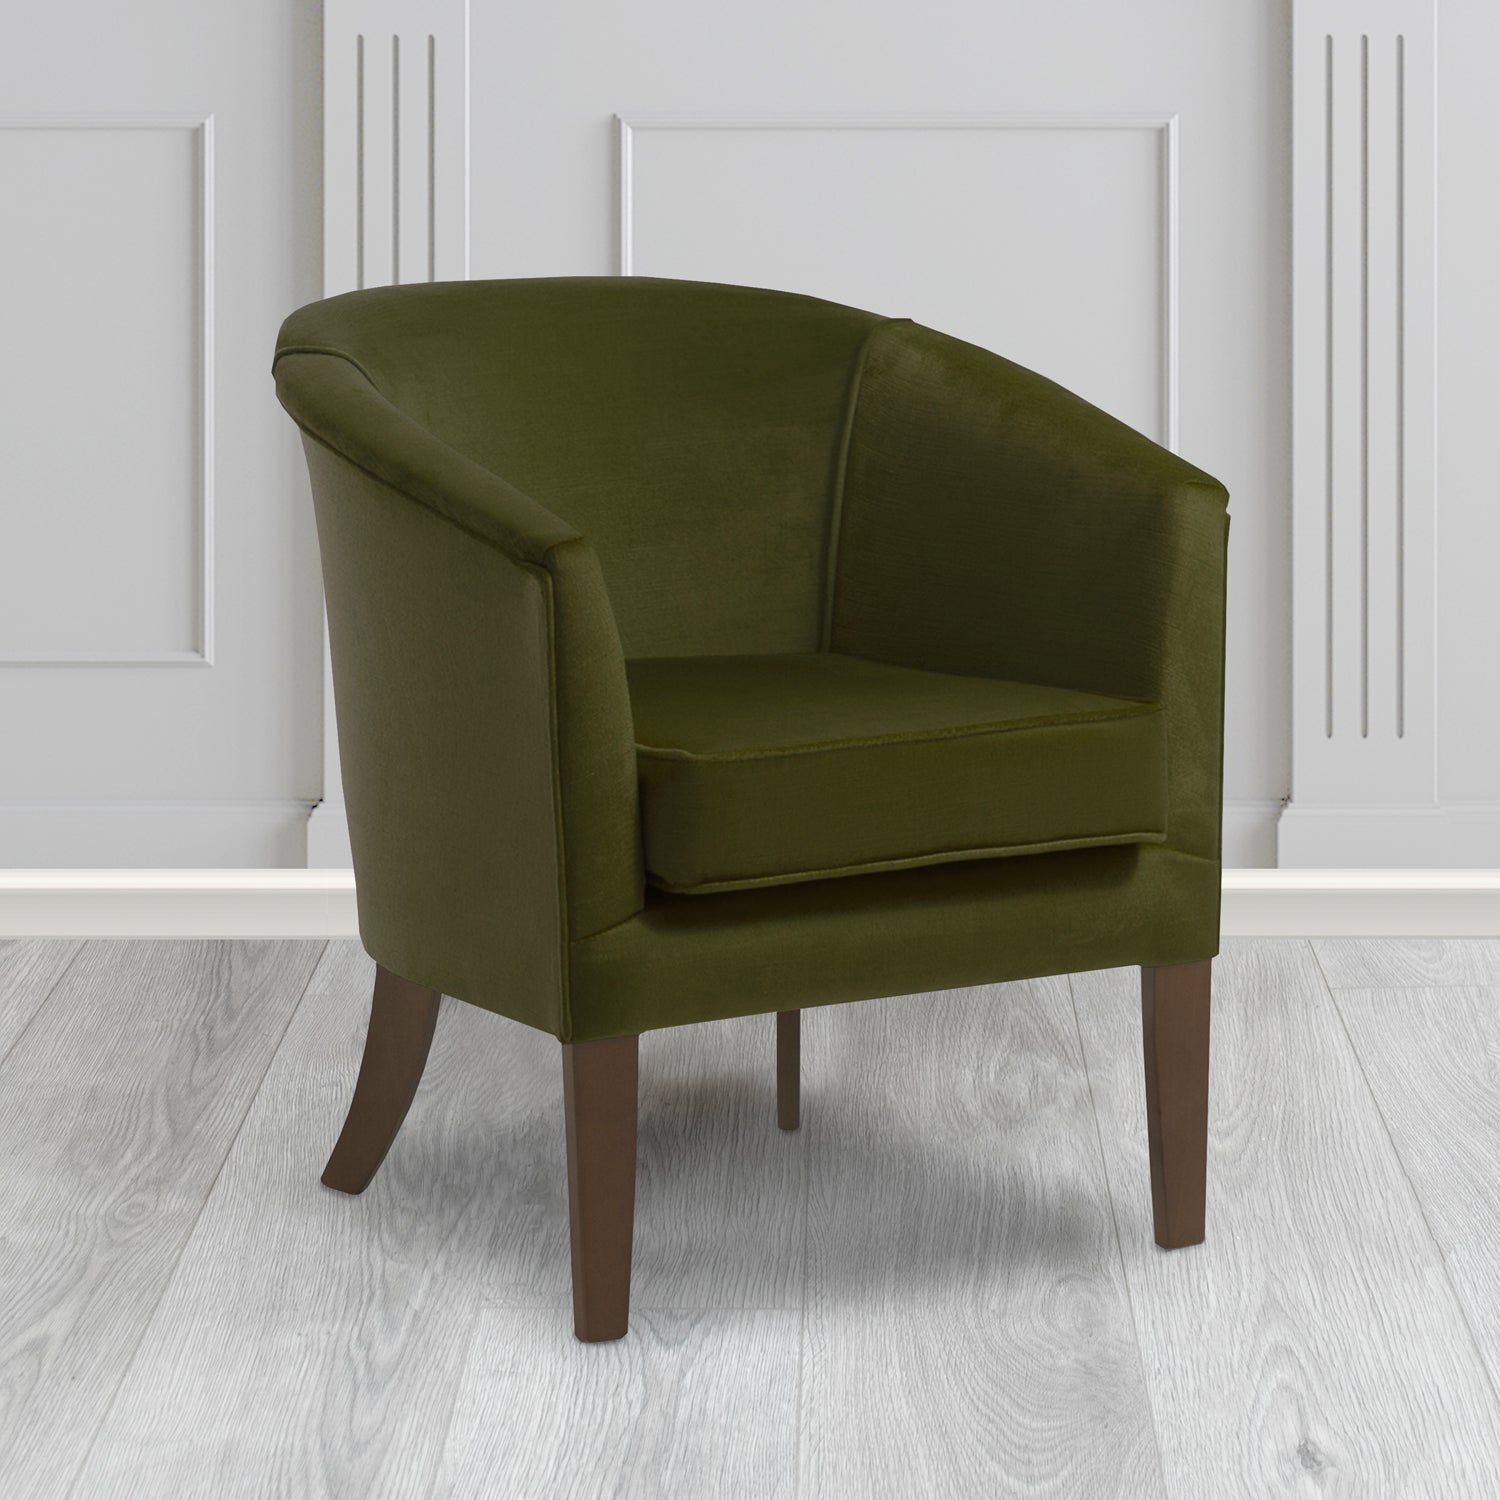 Jazz Tub Chair in Noble 204 Moss Crib 5 Velvet Fabric - Water Resistant - The Tub Chair Shop